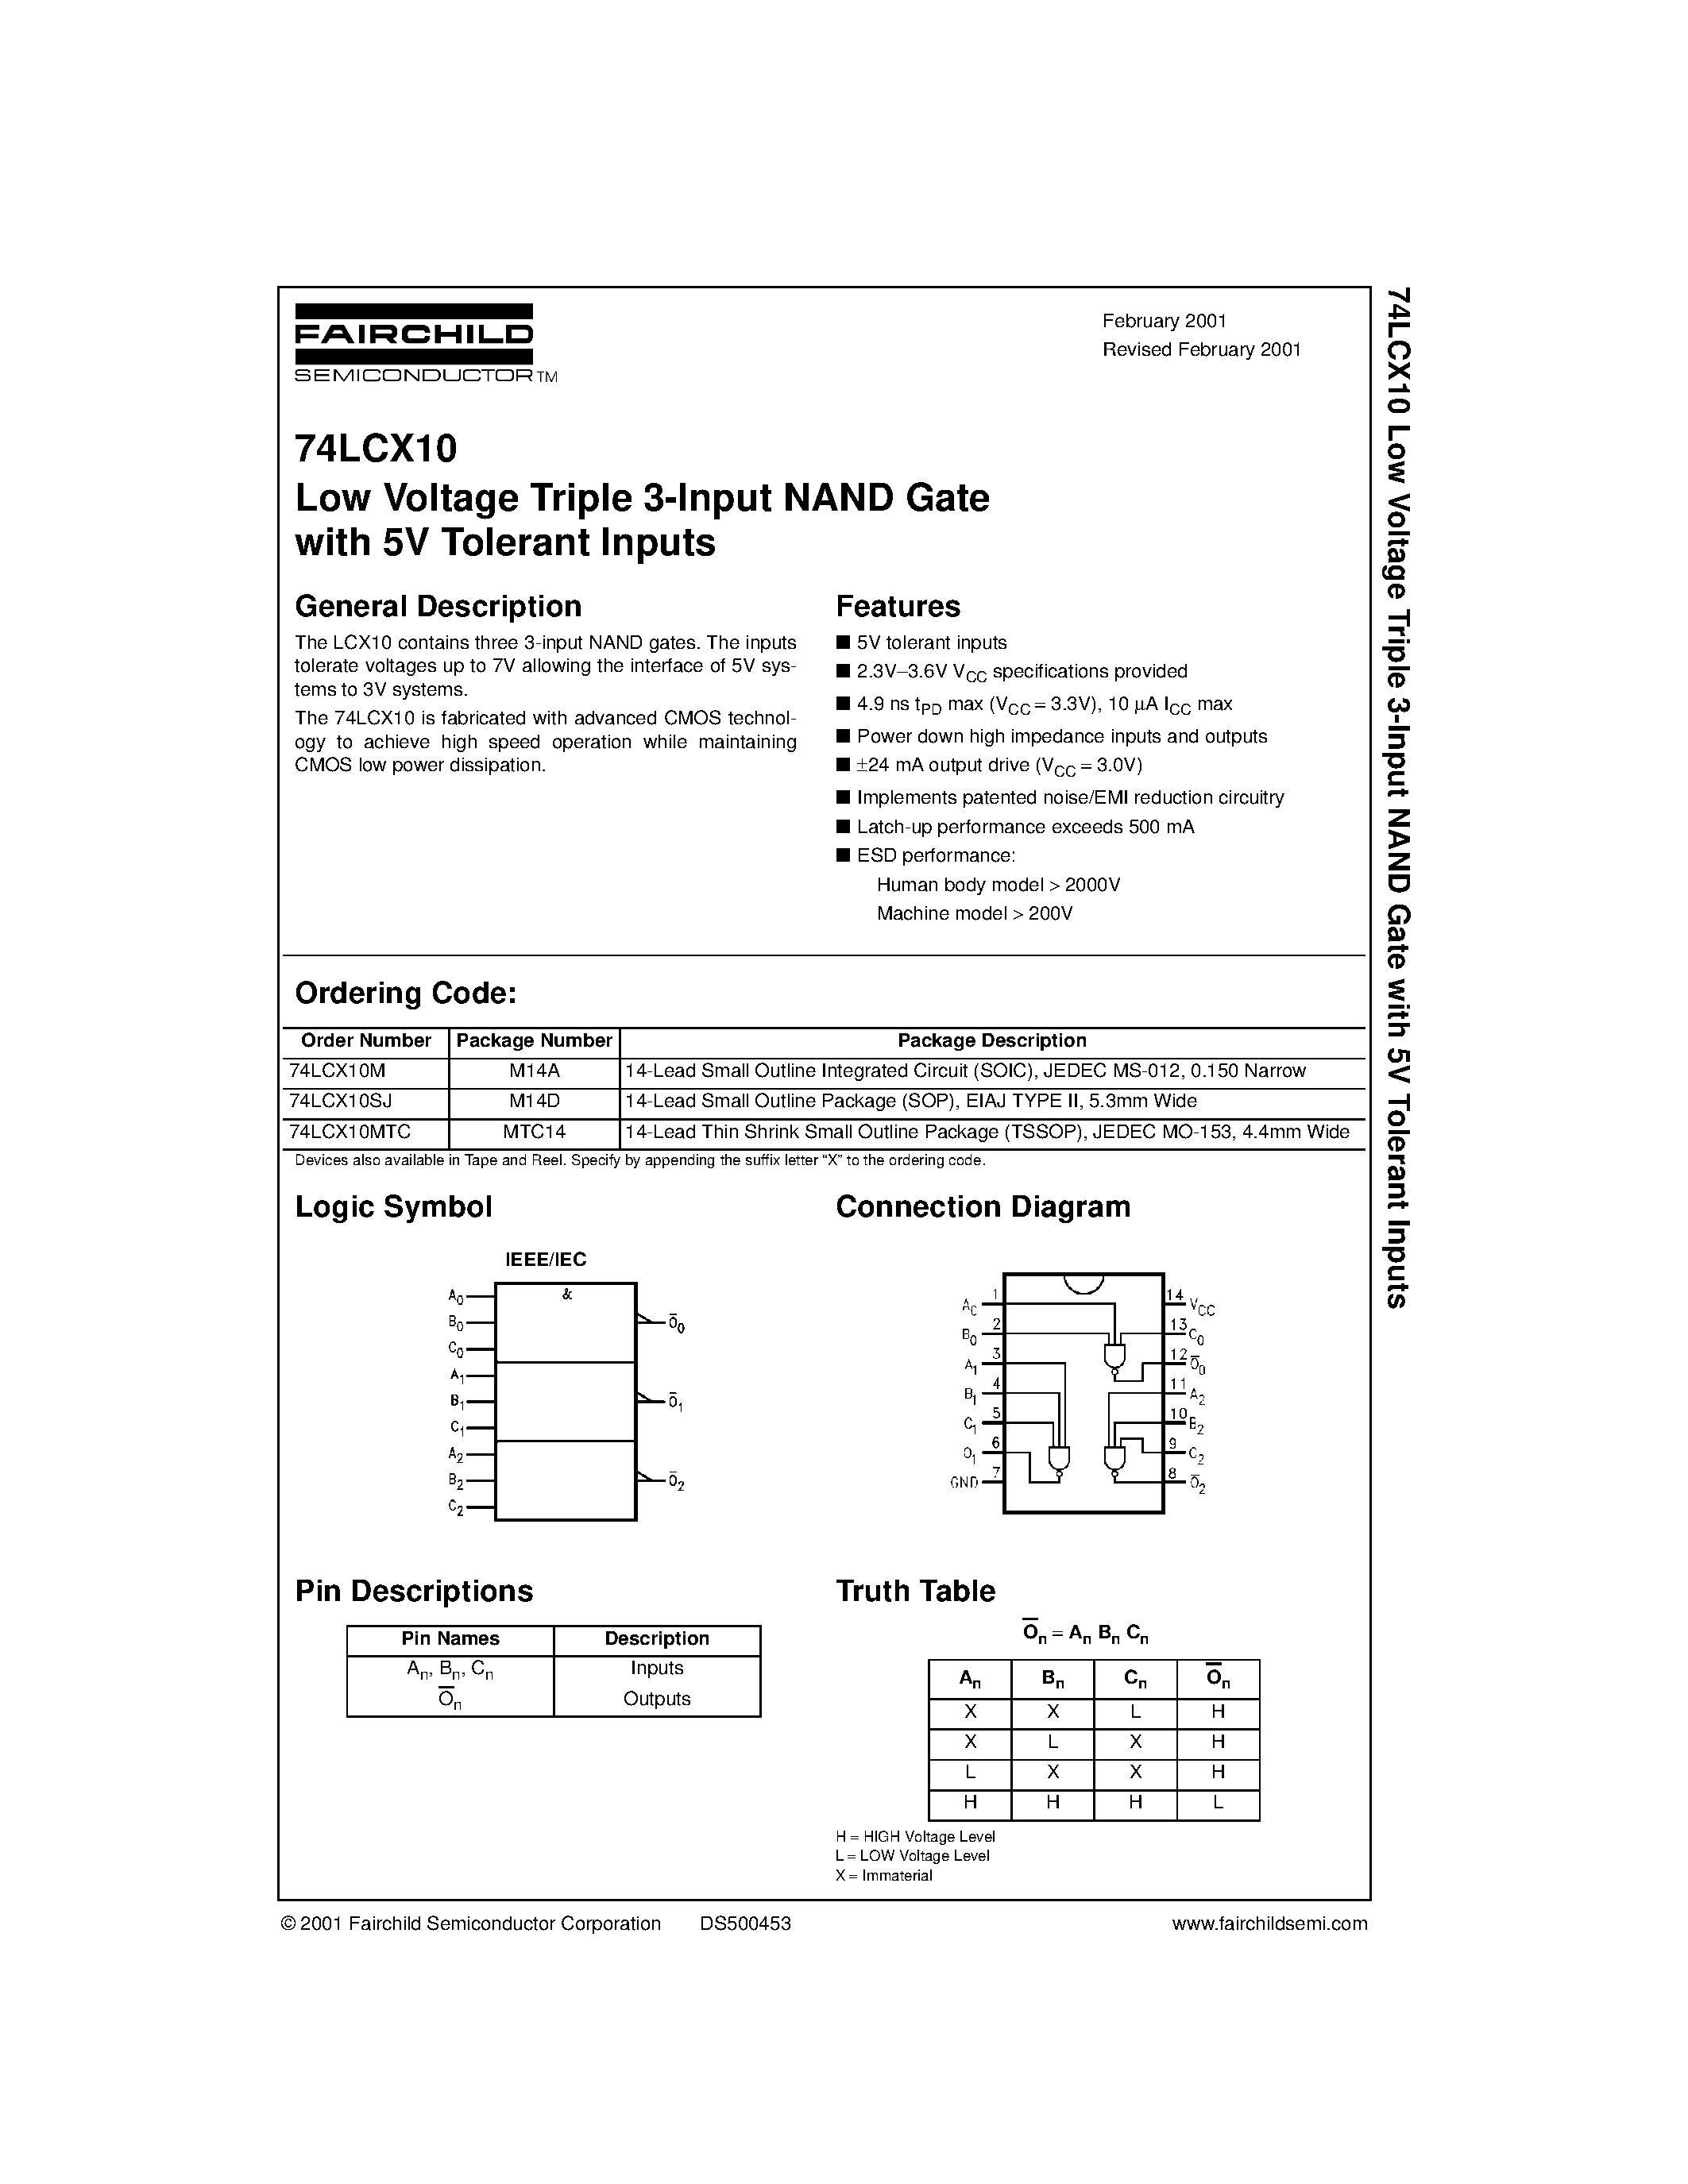 Datasheet 74LCX10 - Low Voltage Triple 3-Input NAND Gate with 5V Tolerant Inputs page 1